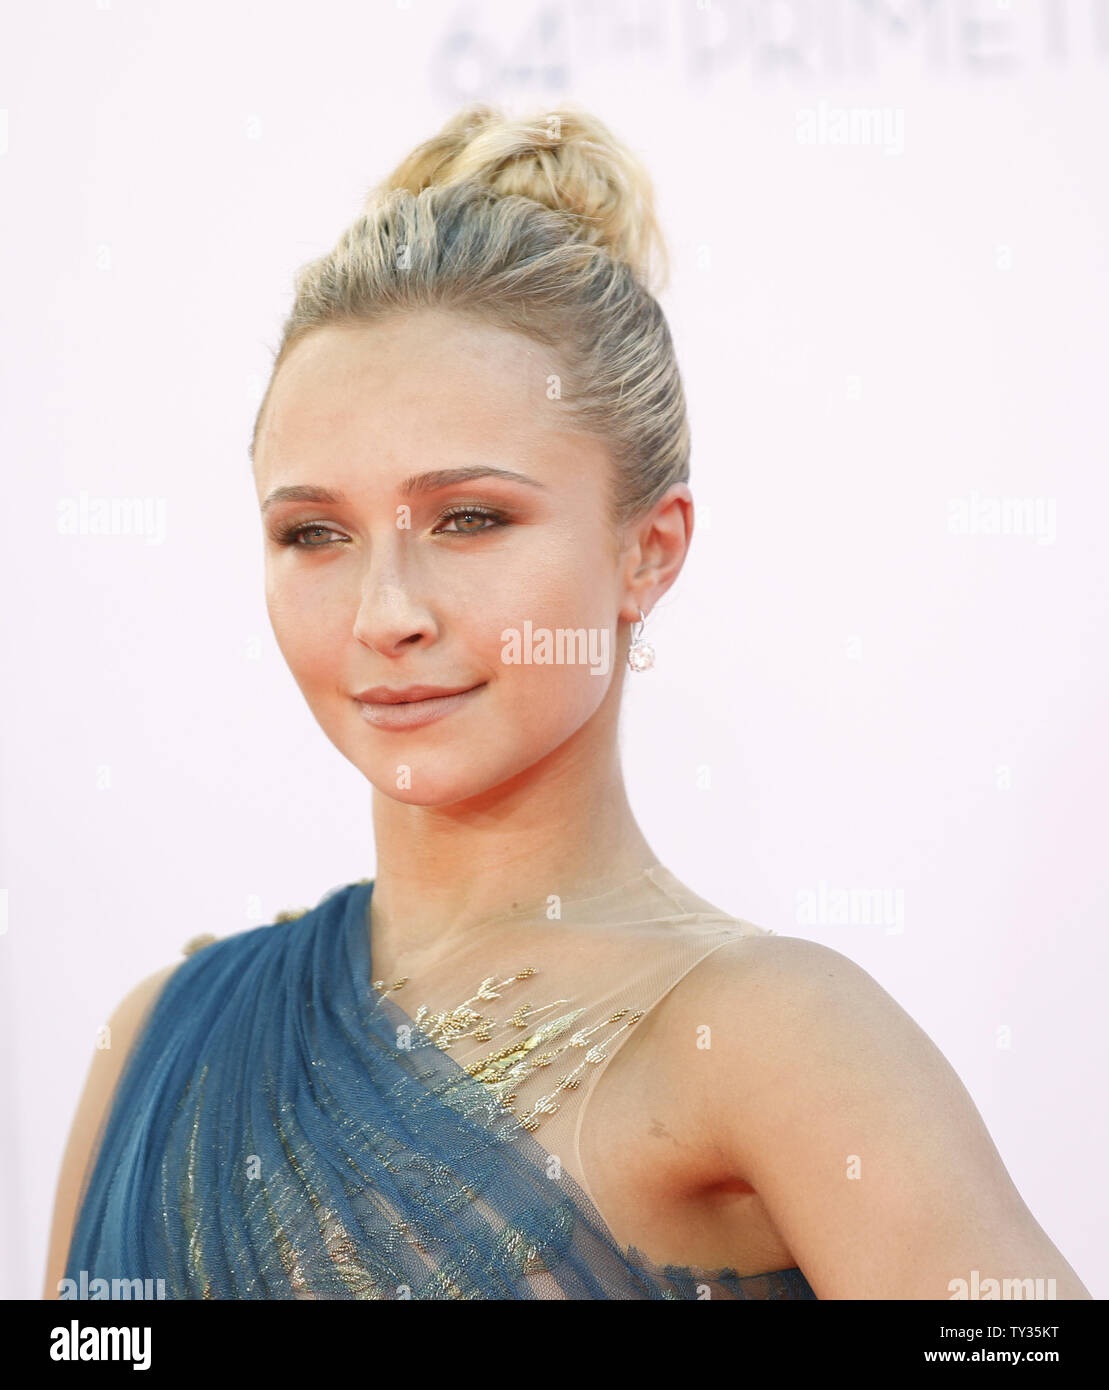 Actress Hayden Panettiere arrives for the the 64th Primetime Emmys at the Nokia Theatre in Los Angeles on September 23, 2012. UPI/Danny Moloshok Stock Photo